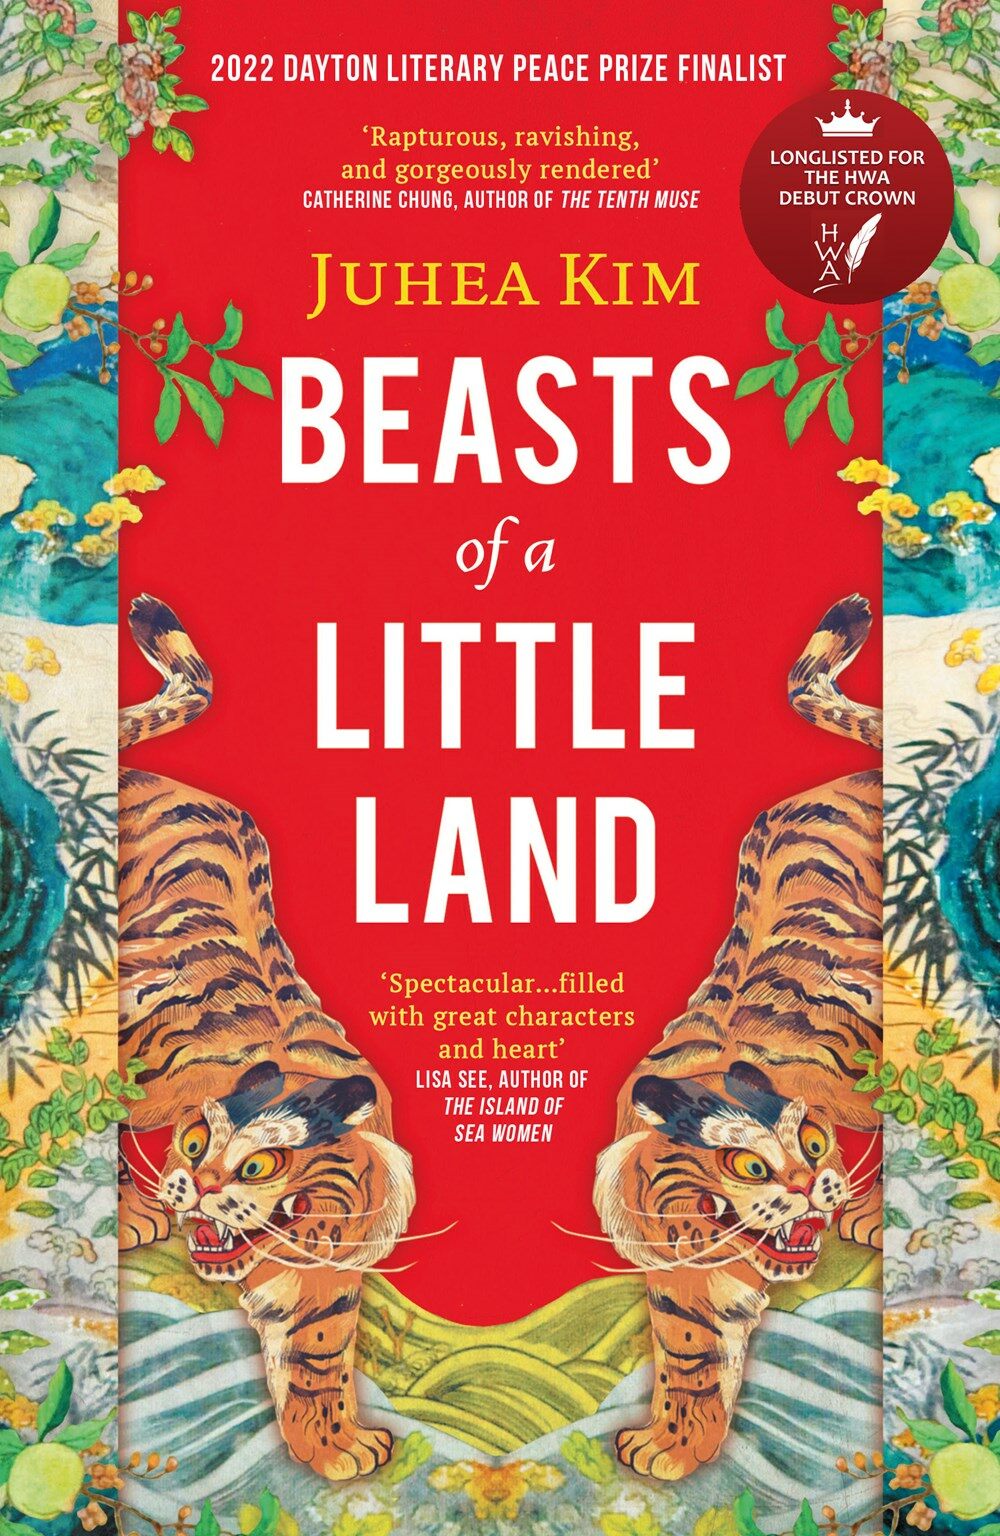 The Beasts of a Little Land (How 50,000 years of human innovation refined - and redefined - nature)